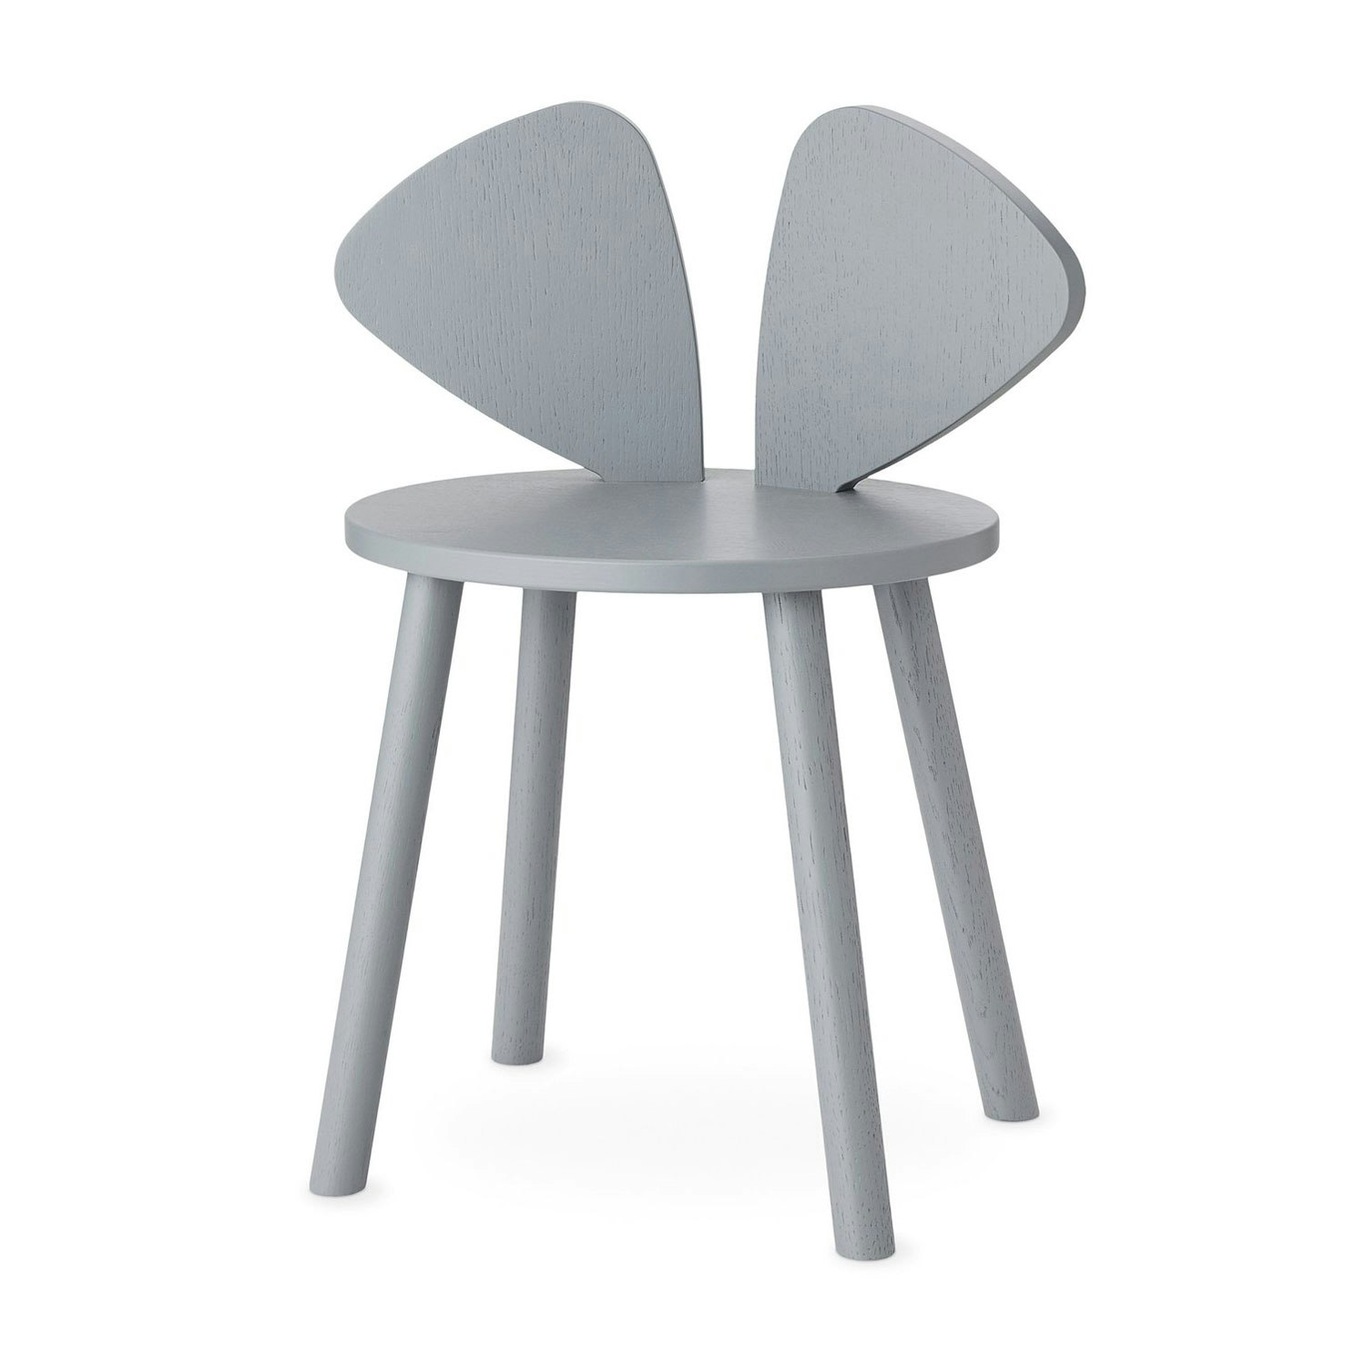 Mouse Chair School - Grey